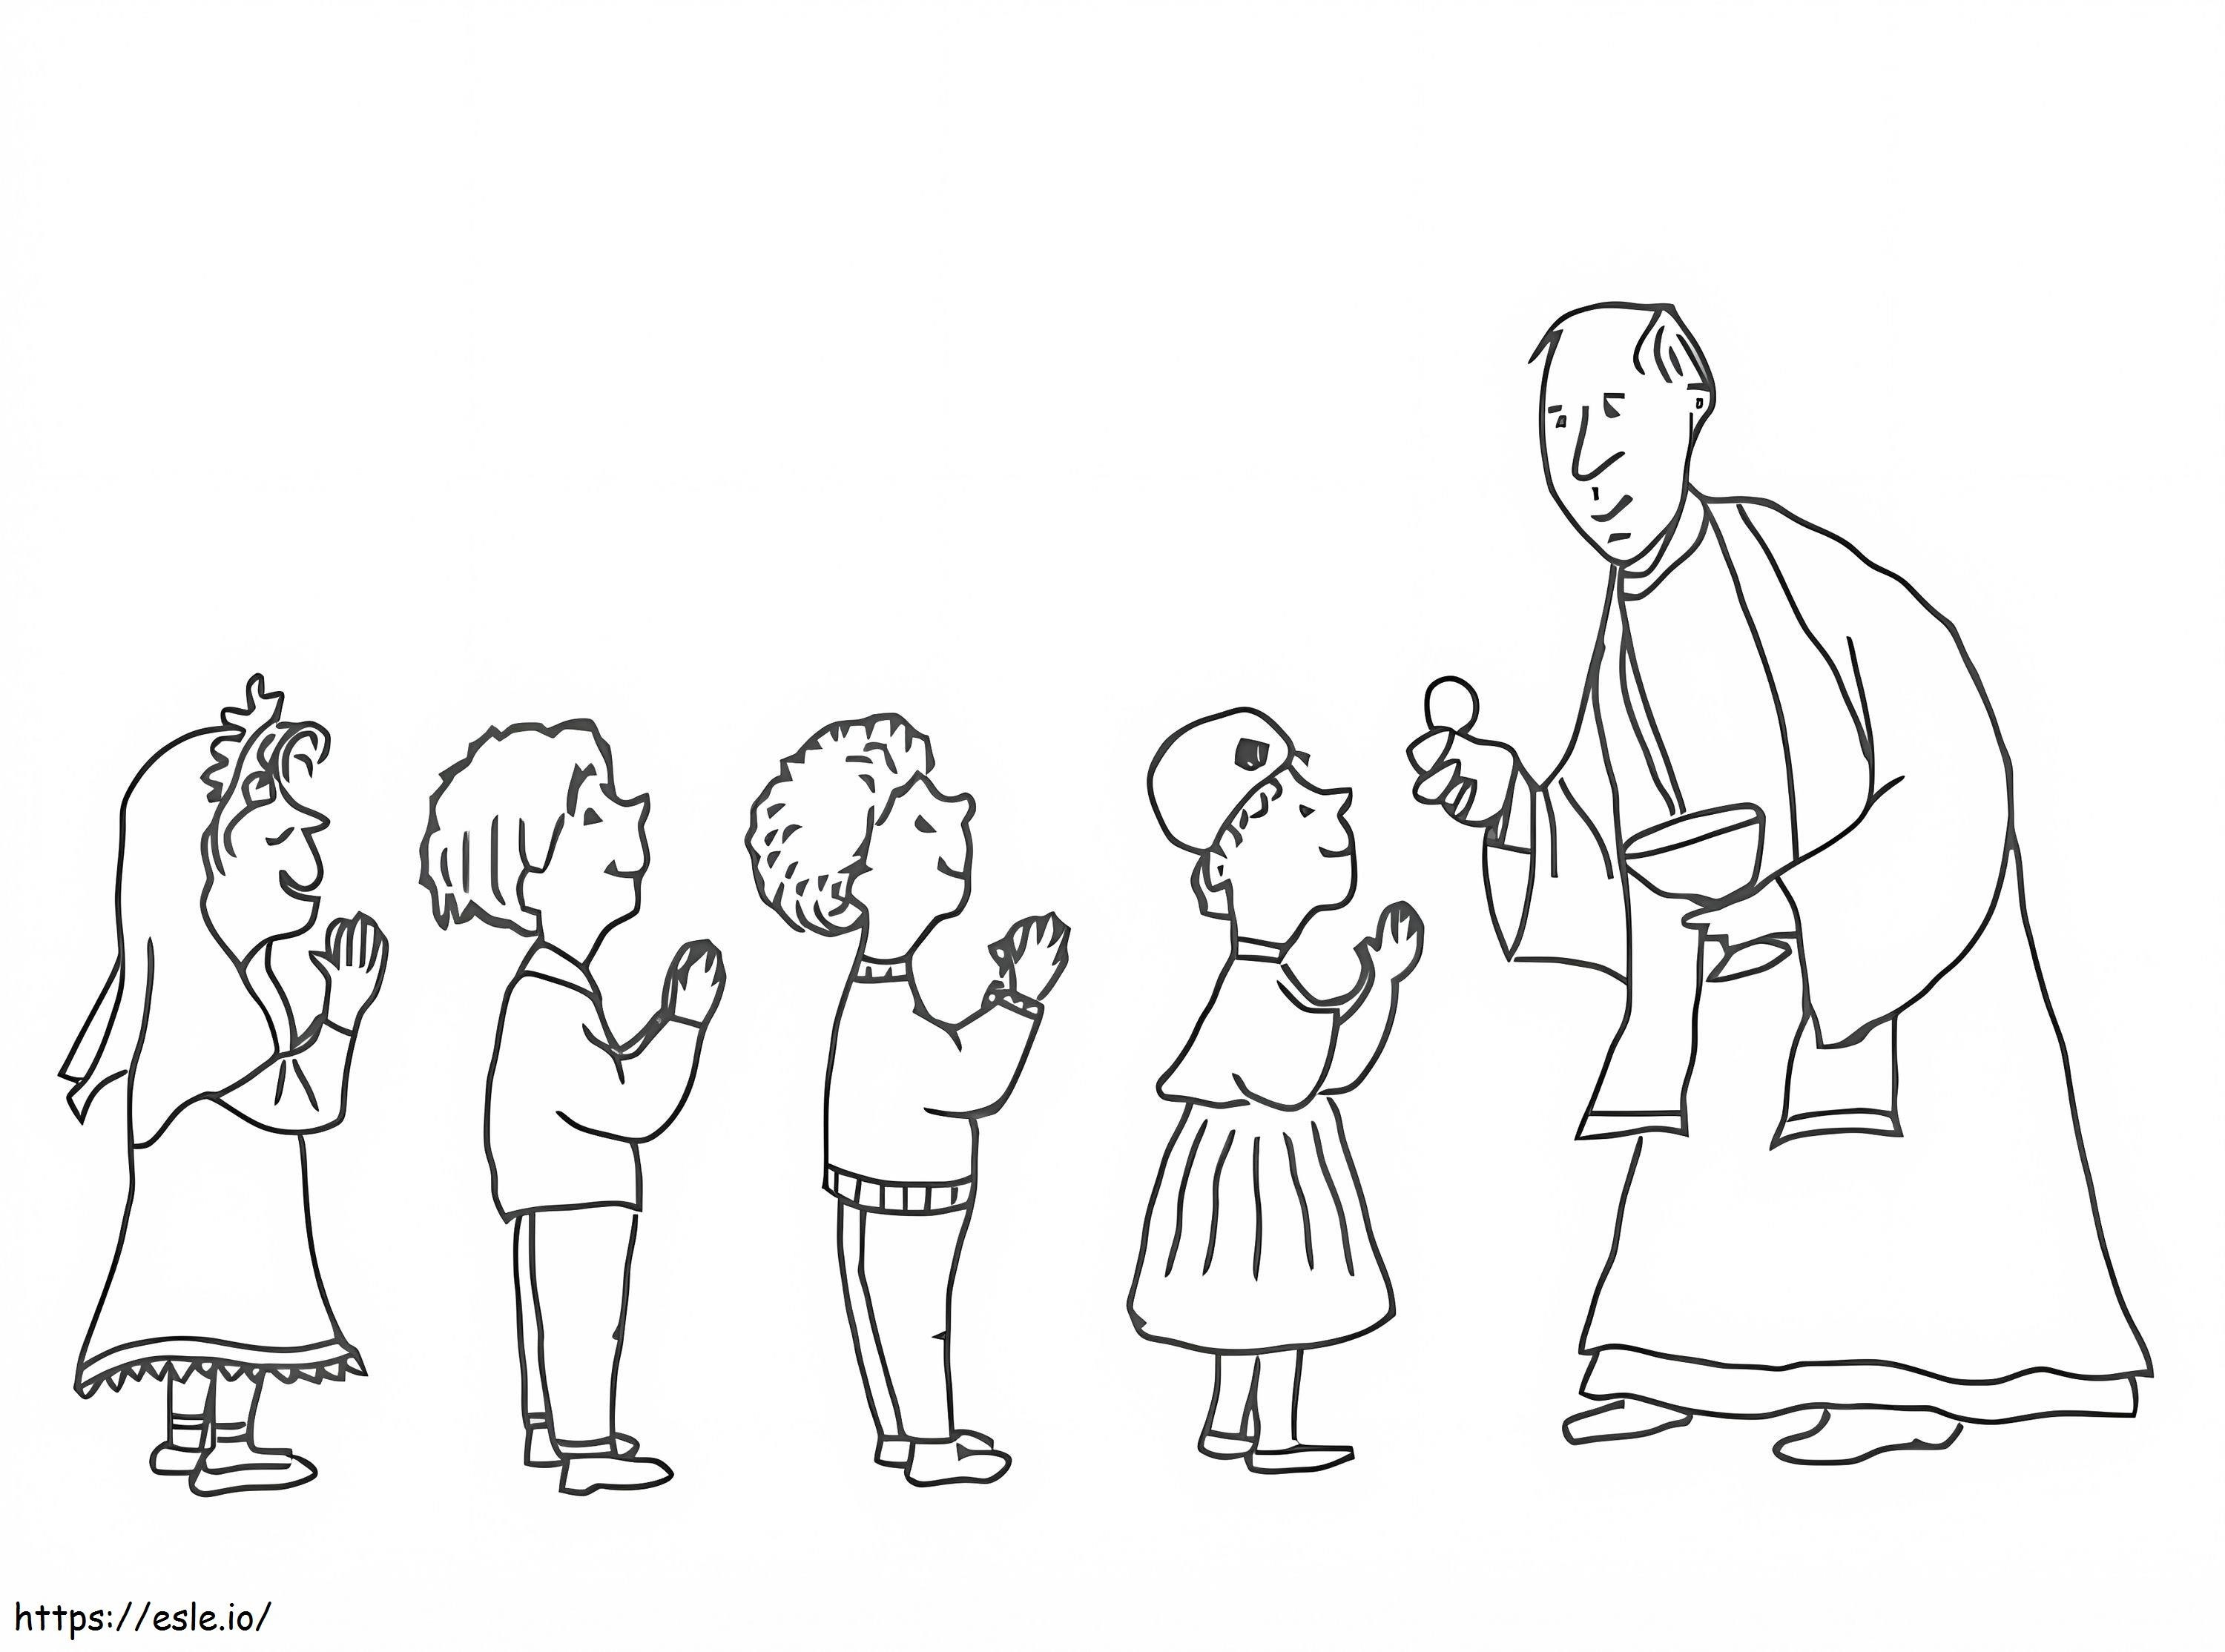 Eucharist coloring page